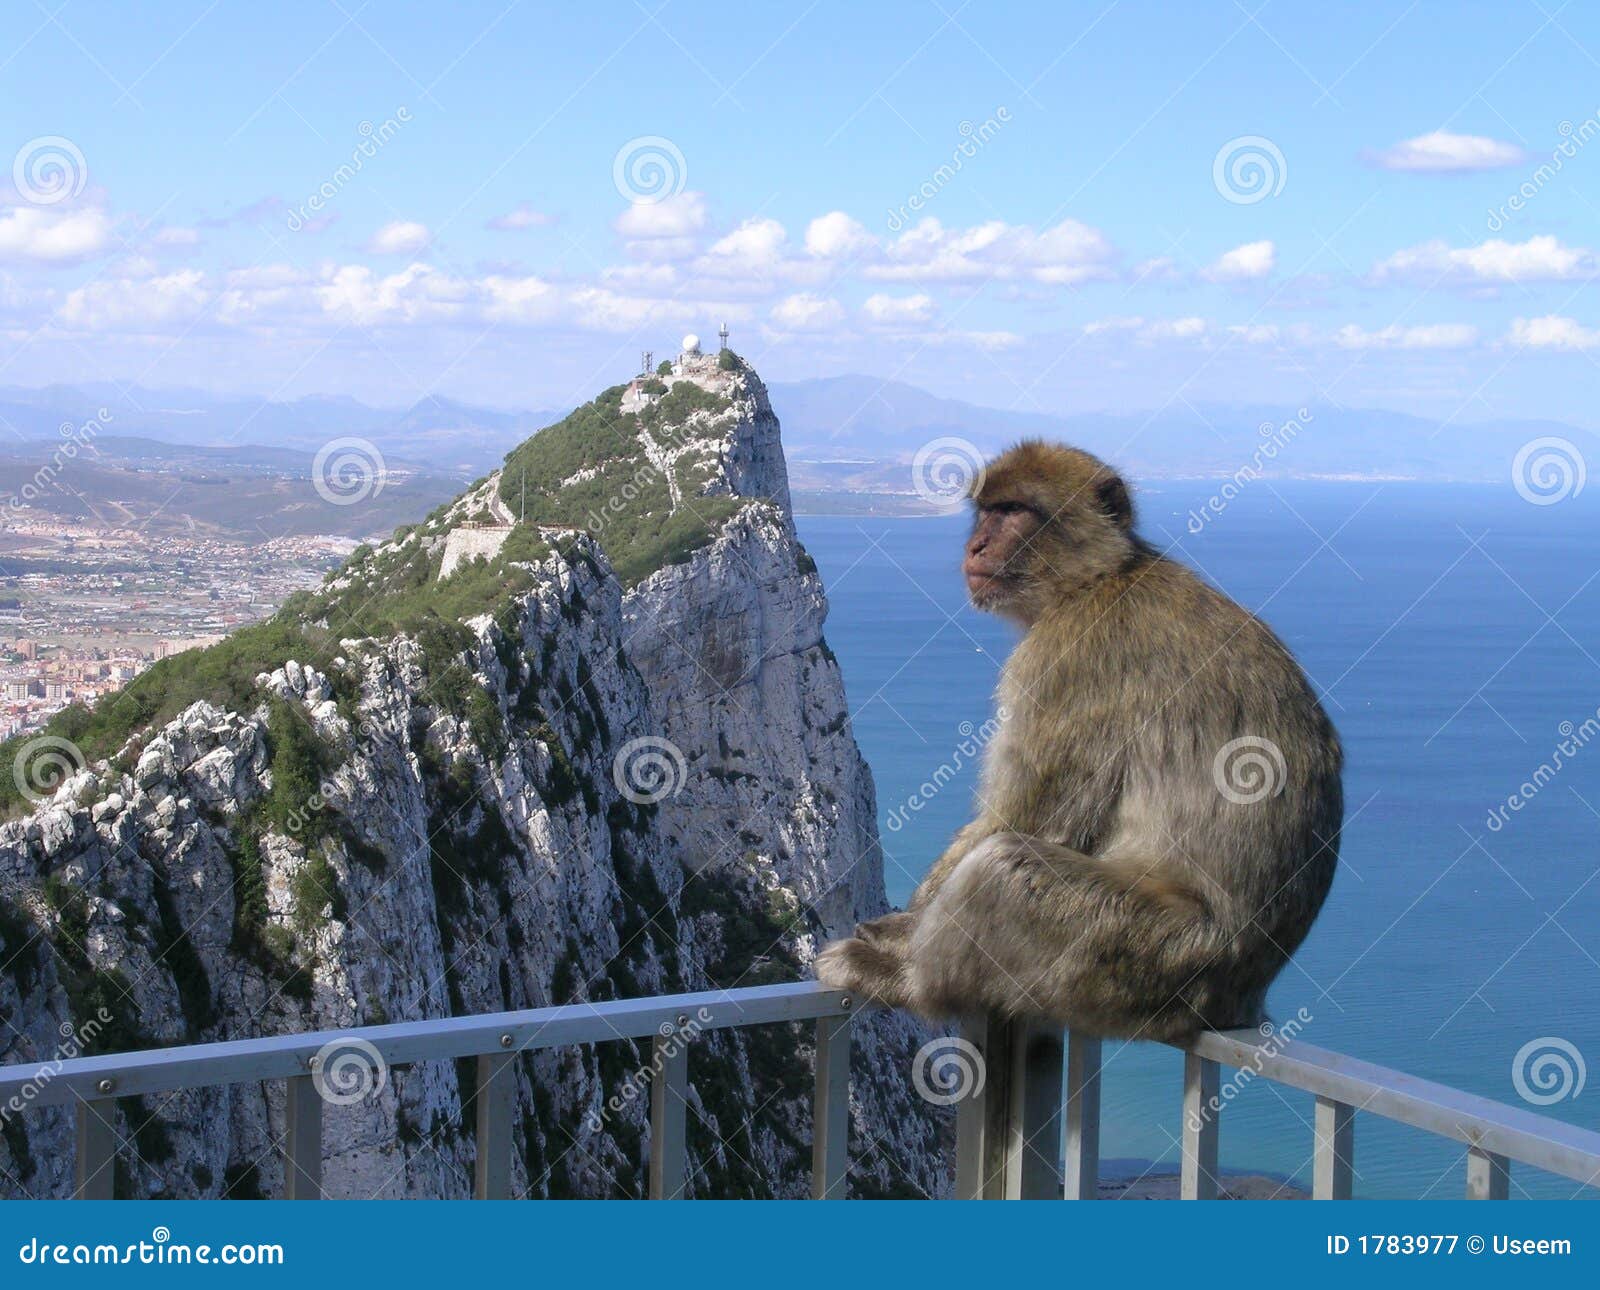 monkey at the rock of gibraltar